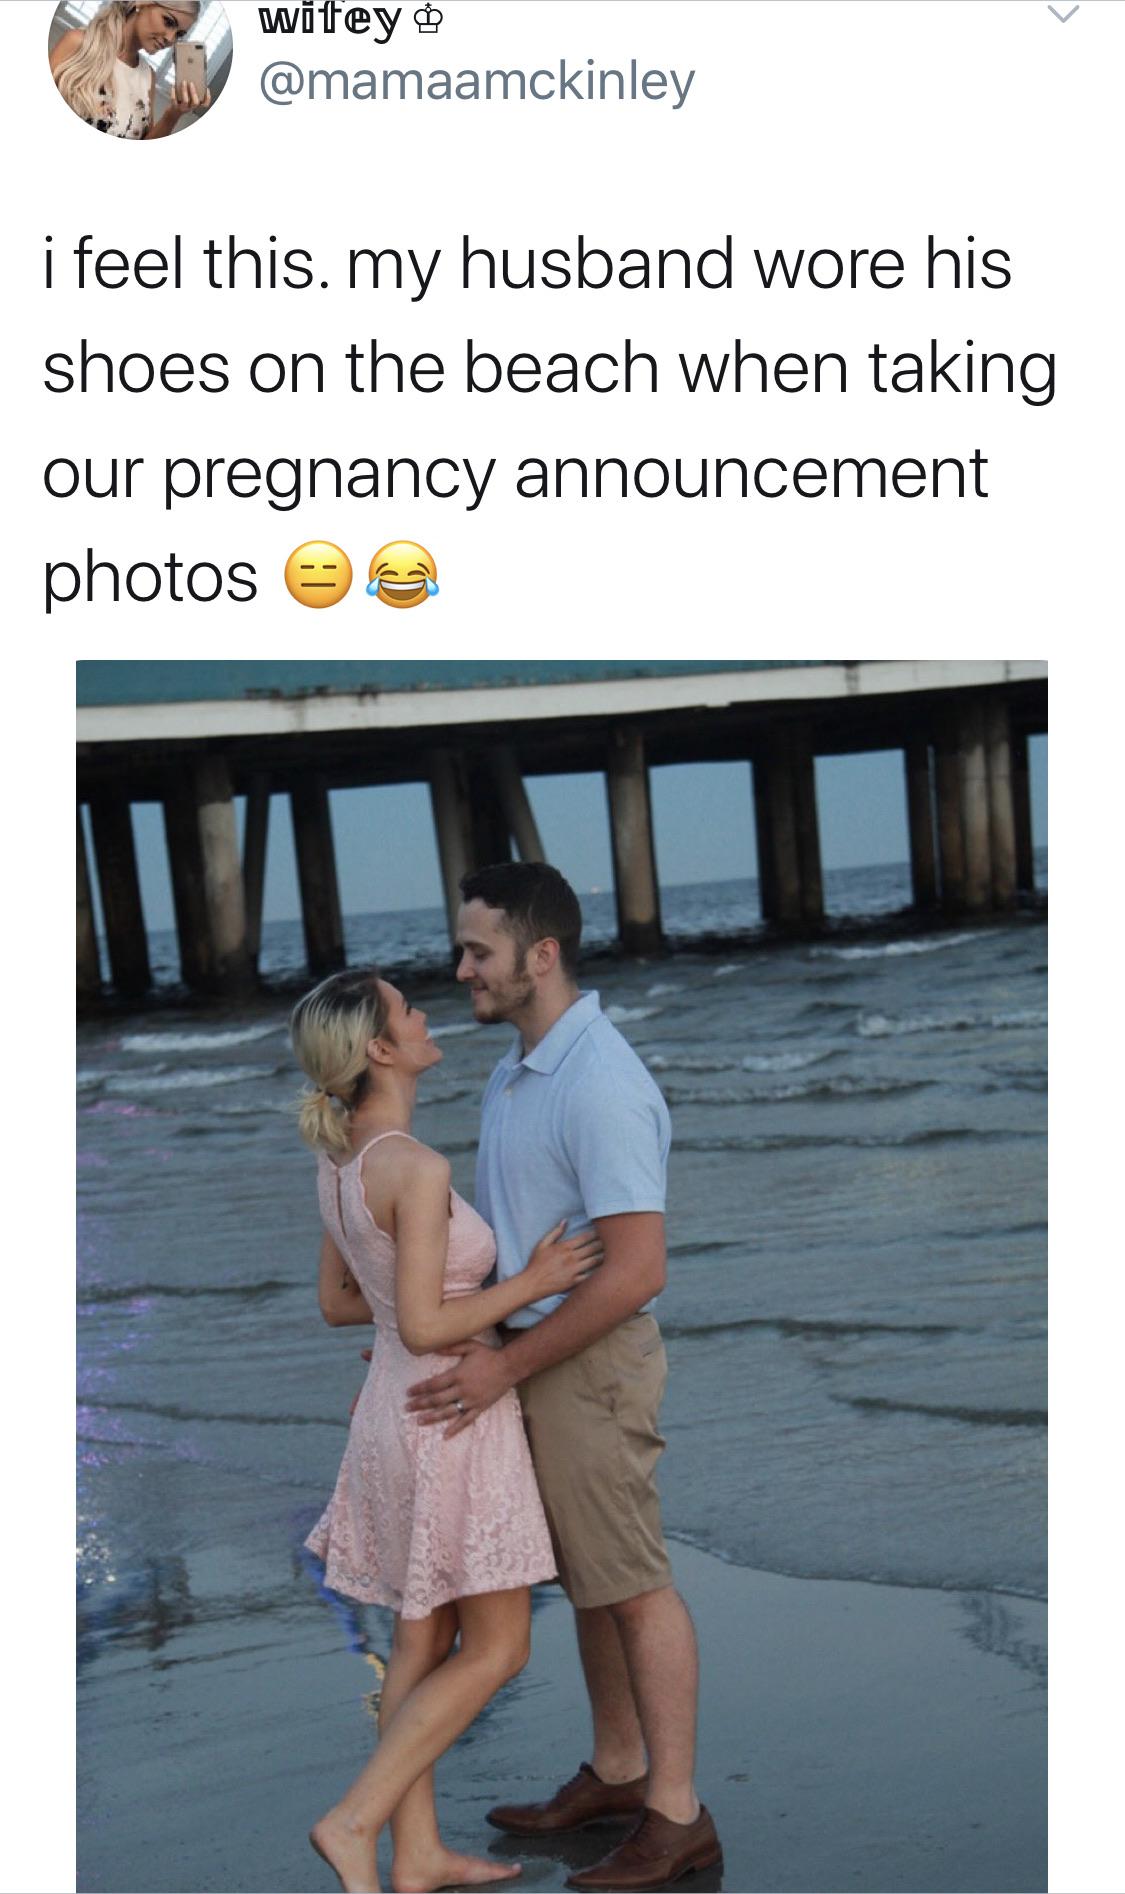 friendship - wifey i feel this. my husband wore his shoes on the beach when taking our pregnancy announcement photos e